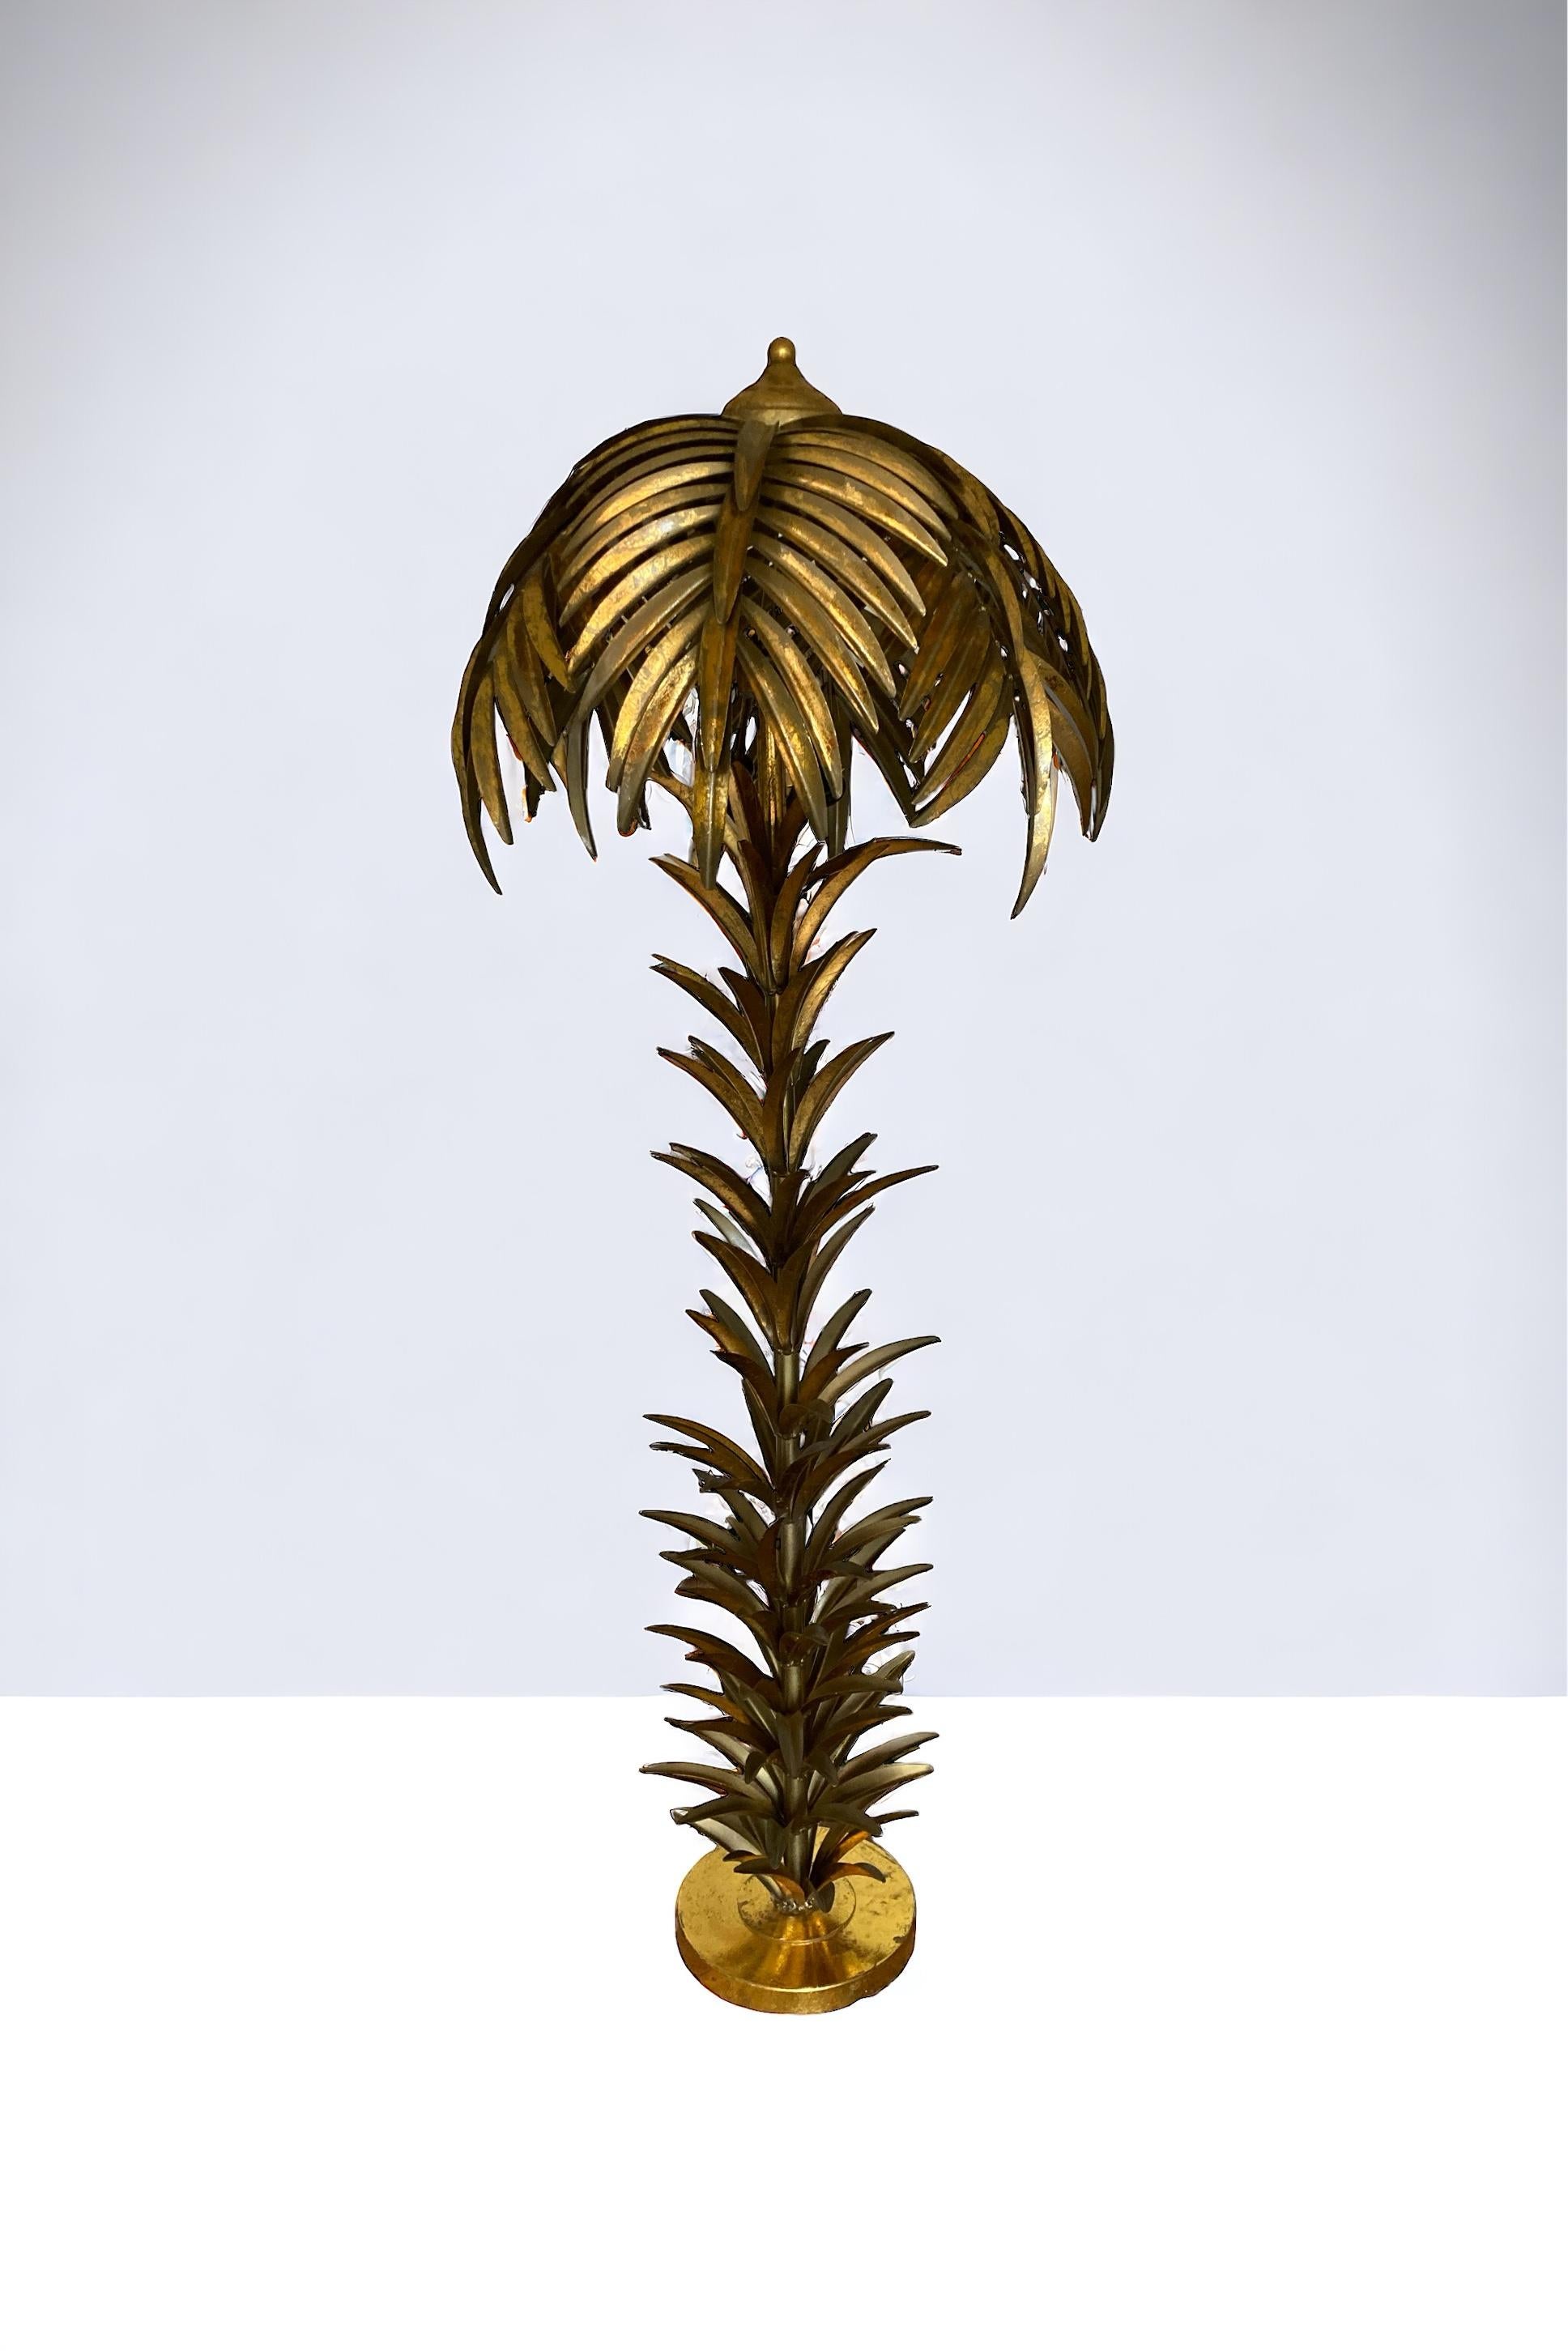 Hollywood Regency Style Gilt Metal Palm Tree Floor Lamp, Mid to late 20C In Good Condition For Sale In Bishop's Stortford, GB